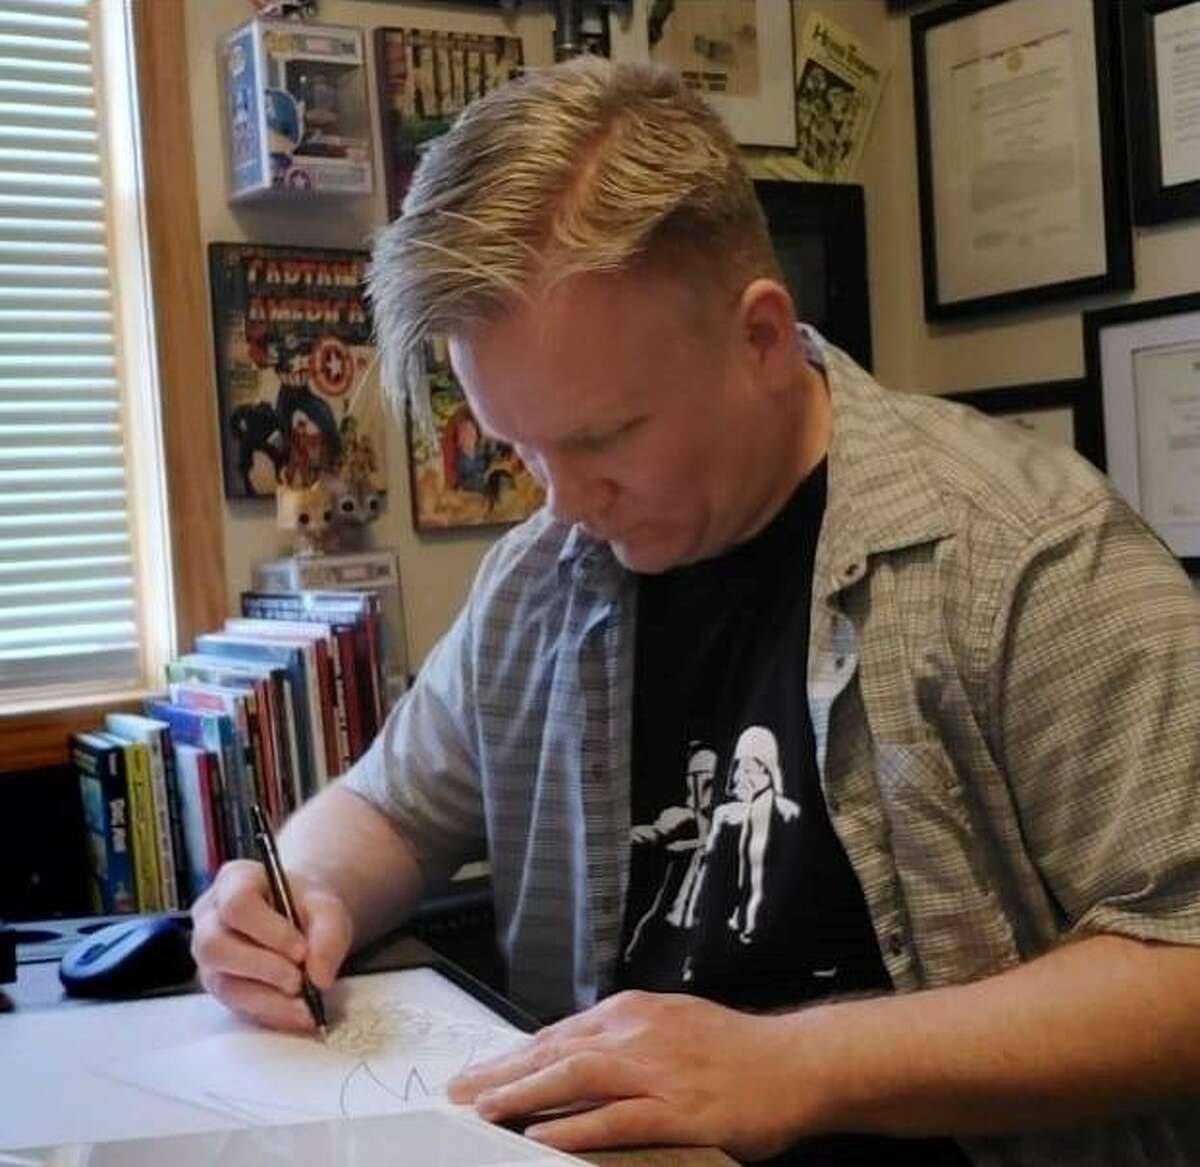 “I really learned that drawing was something that I like to do, but it also helped me keep everything stable, you know, keep a level-headed mind, so it was very beneficial,” said retired Air Force Master Sgt. Dylan Bolander, who has since written and illustrated the children’s book, “Heathee and the Double Rainbow Tale.”